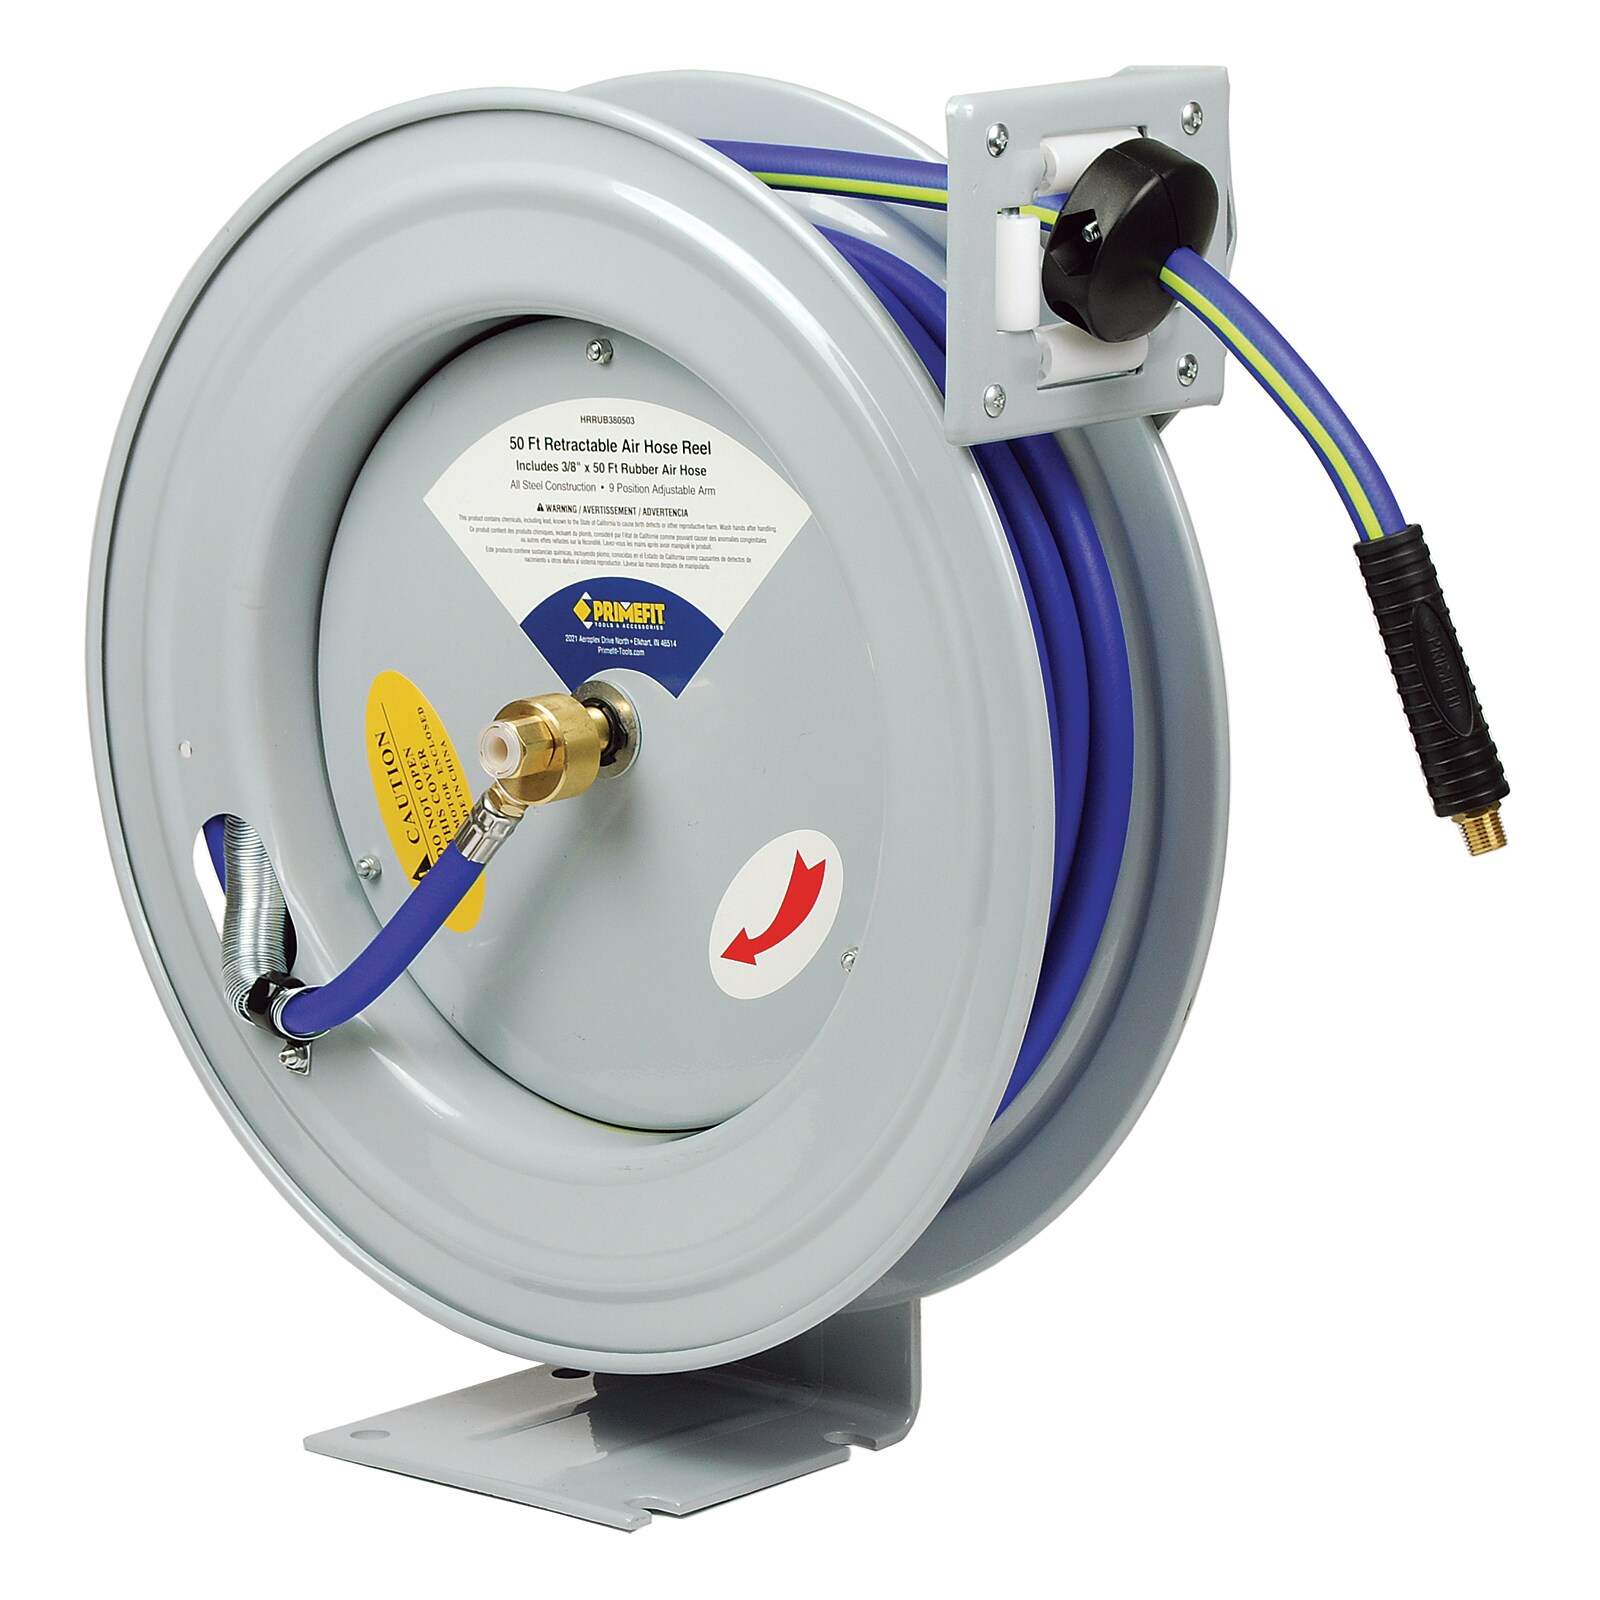 CENTRAL PNEUMATIC 3/8 In. X 50 Ft. Retractable Hose Reel for